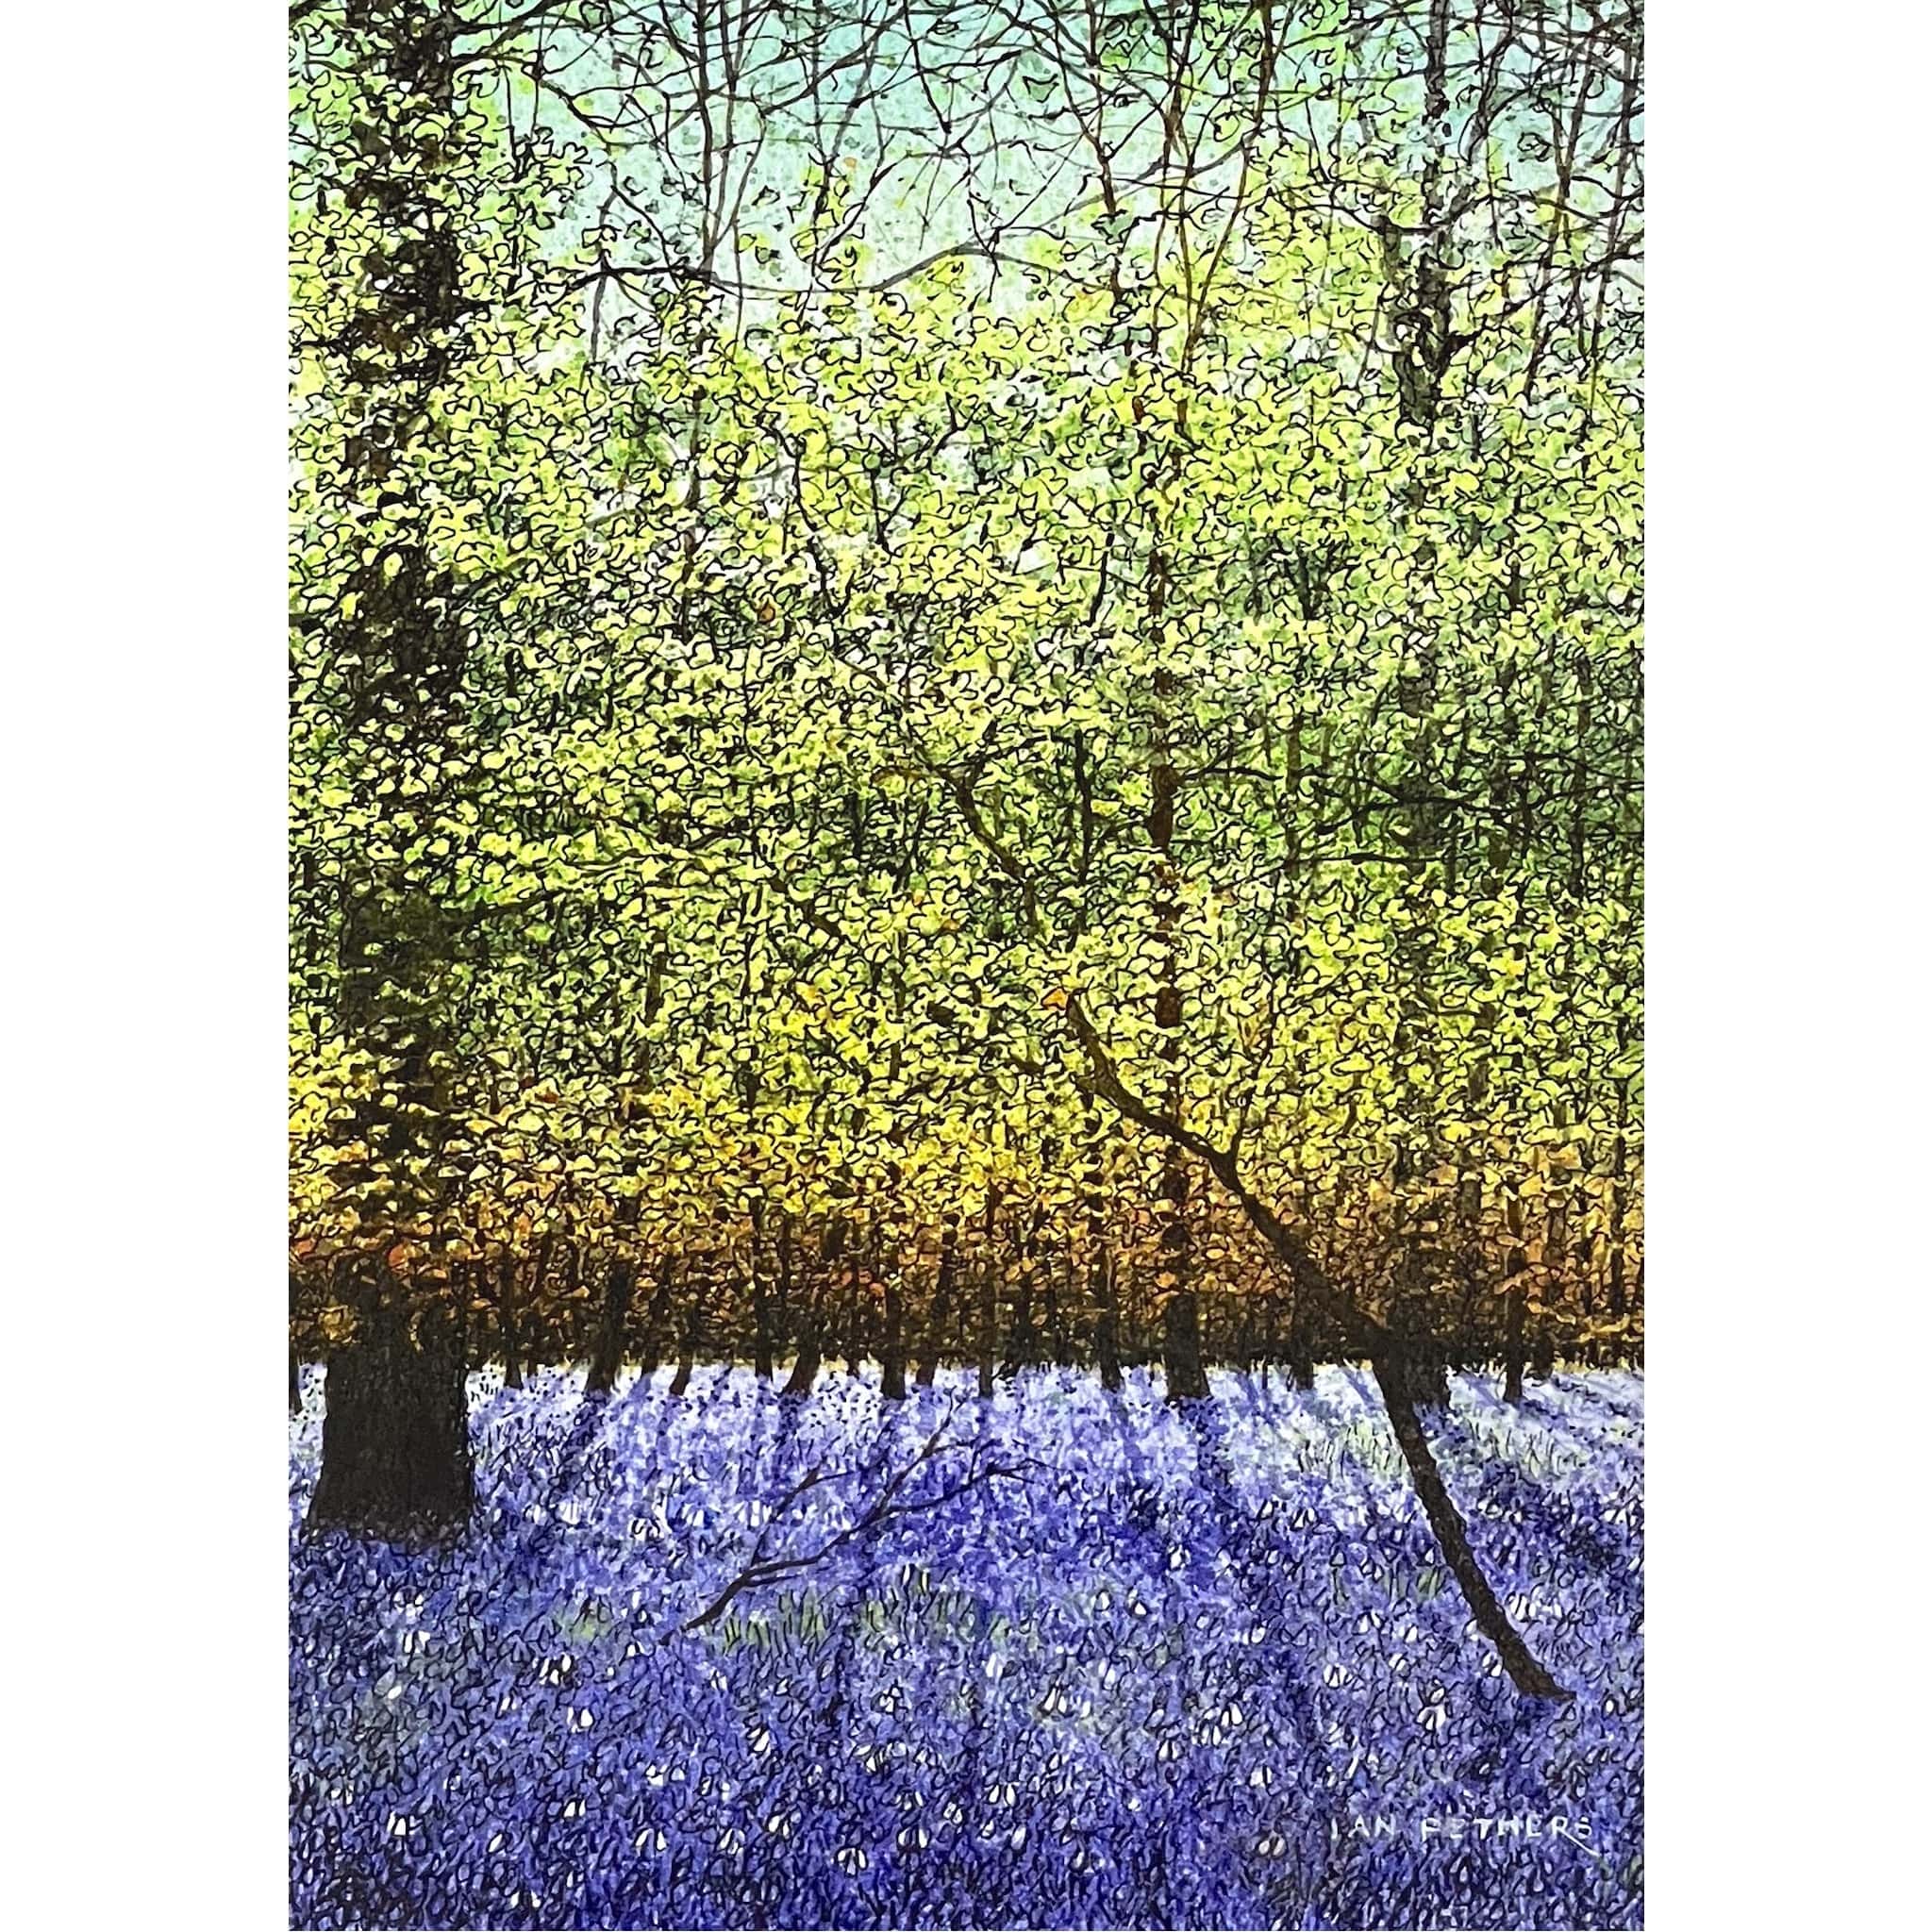 Painting of bluebells growing underneath trees by artist Ian Pethers